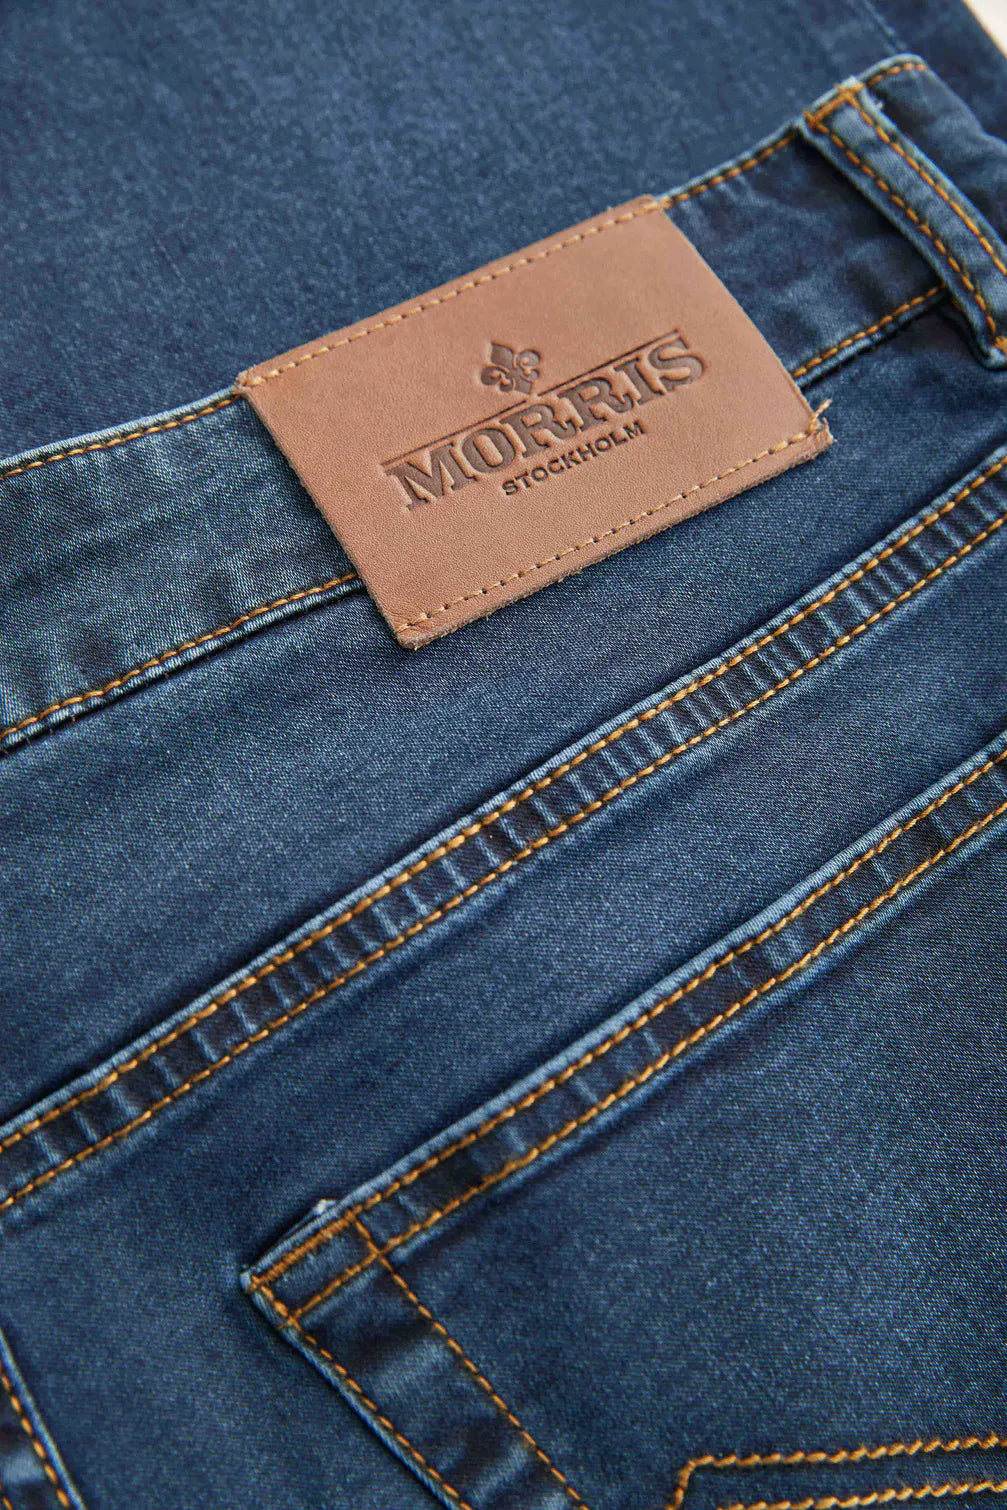 Morris James Satin Jeans One Year Wash